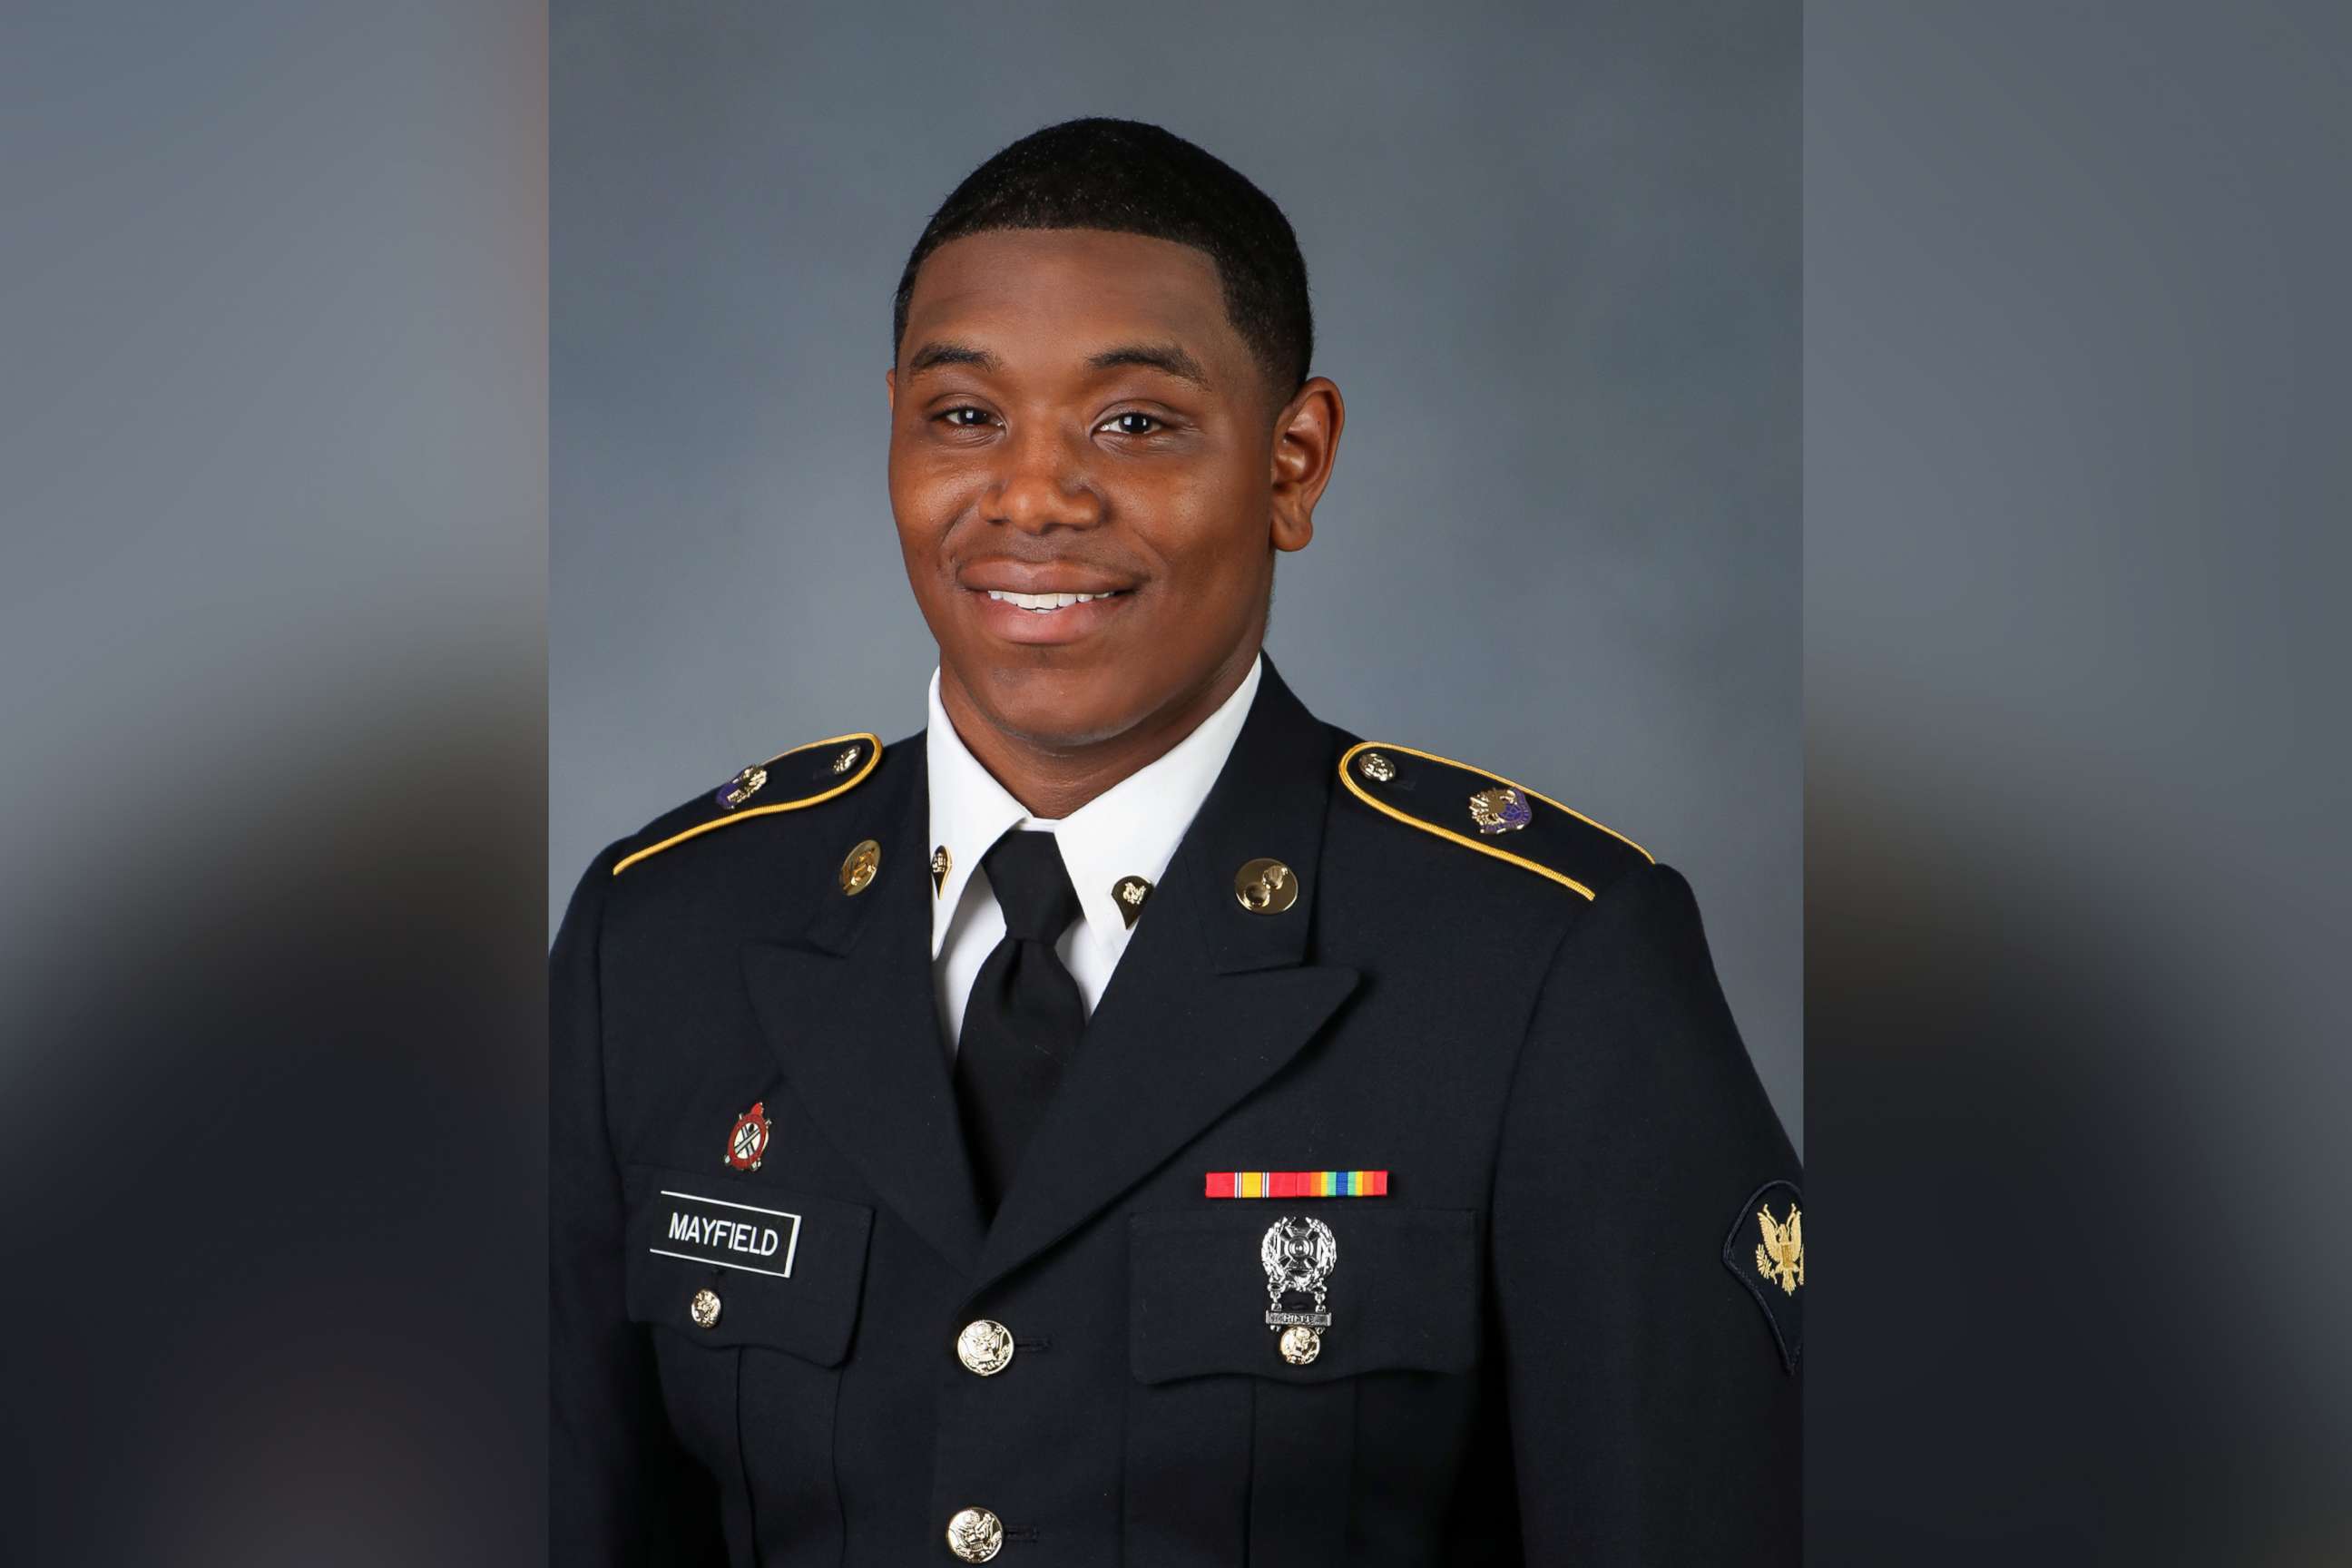 PHOTO: U.S. Army Spc. Henry J. Mayfield Jr., 23, from Evergreen Park, Ill., was killed on Jan. 5, 2020, during an attack in Manda Bay, Kenya.